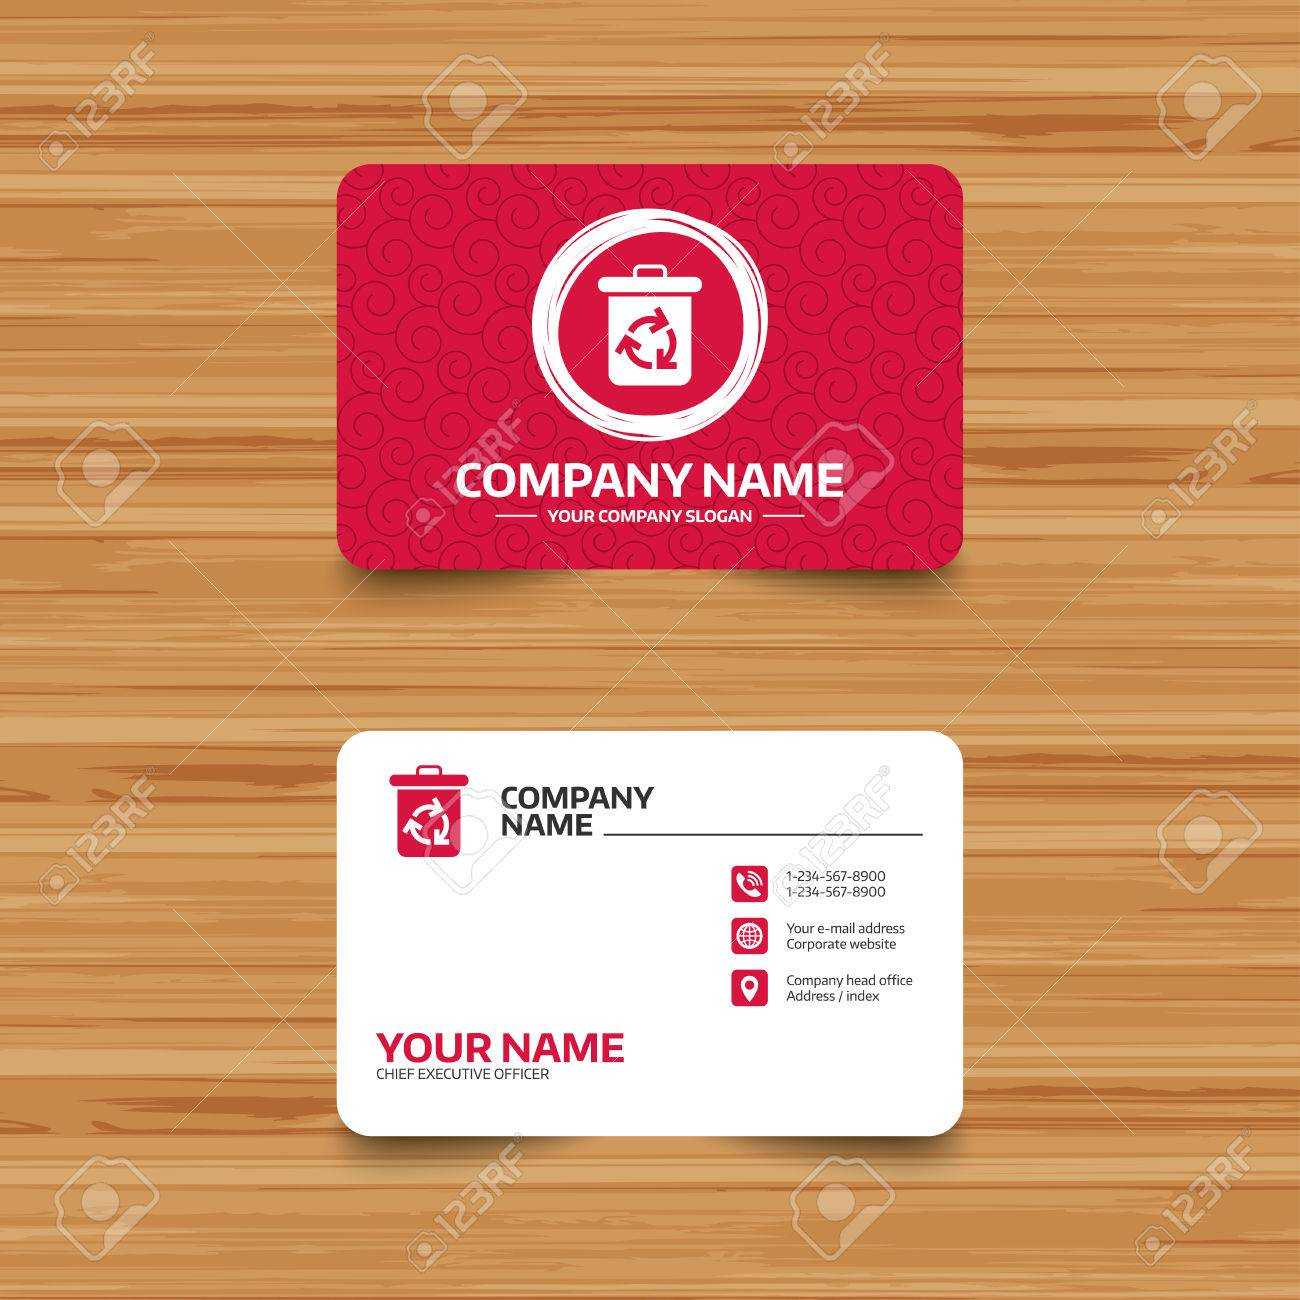 Business Card Template With Texture. Recycle Bin Icon. Reuse Or Reduce  Symbol. Phone, Web And Location Icons. Visiting Card Vector With Bin Card Template